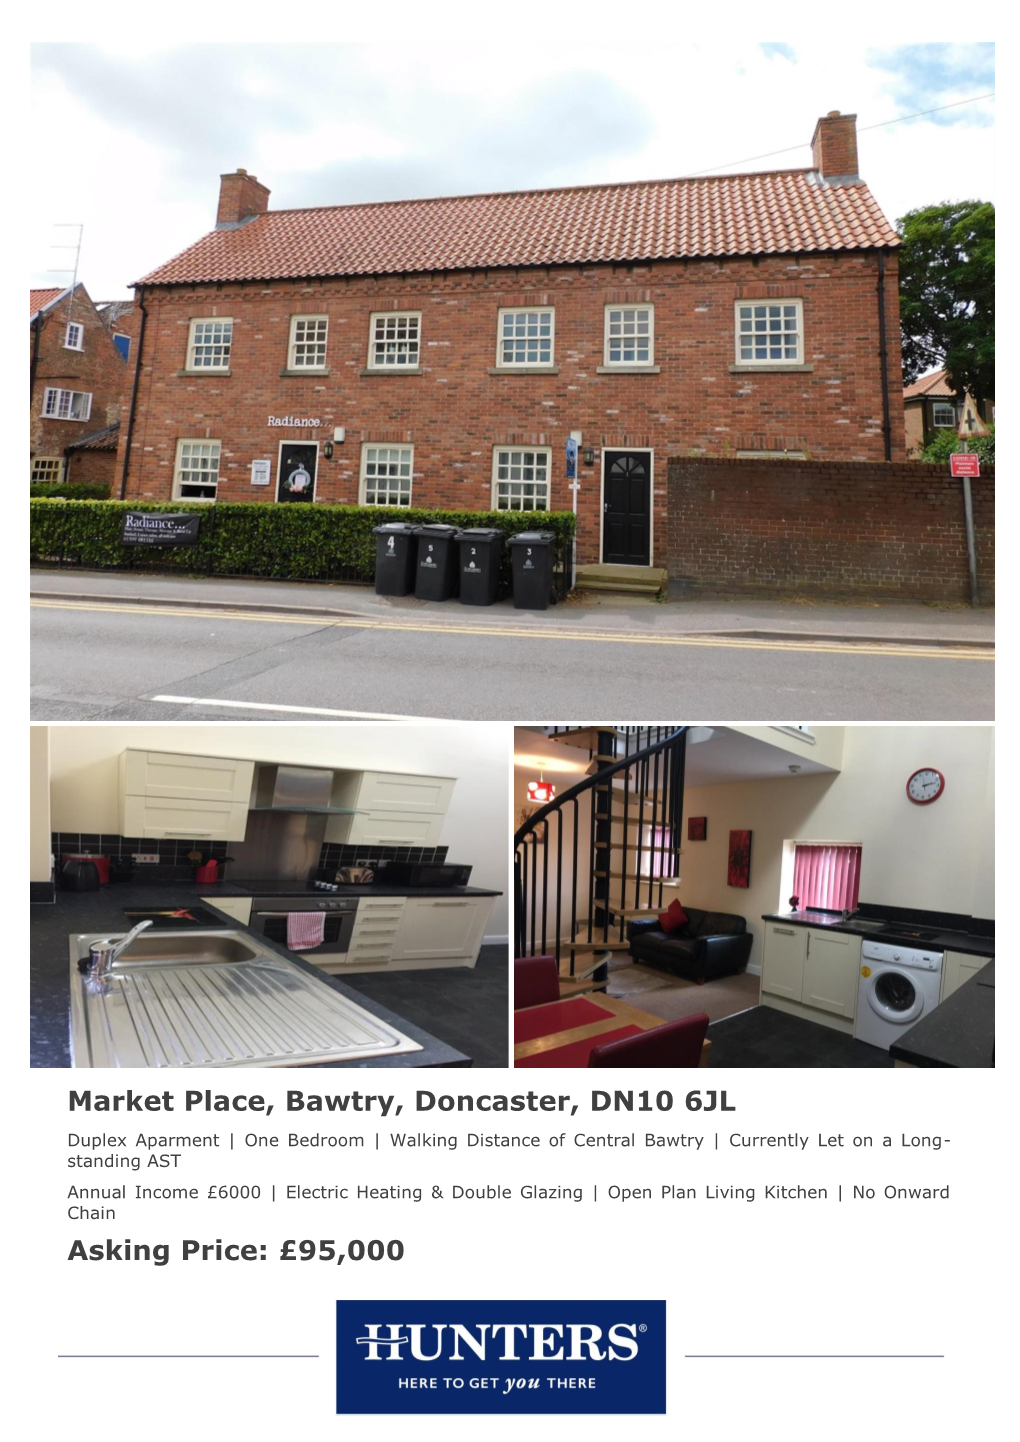 Market Place, Bawtry, Doncaster, DN10 6JL Asking Price: £95,000